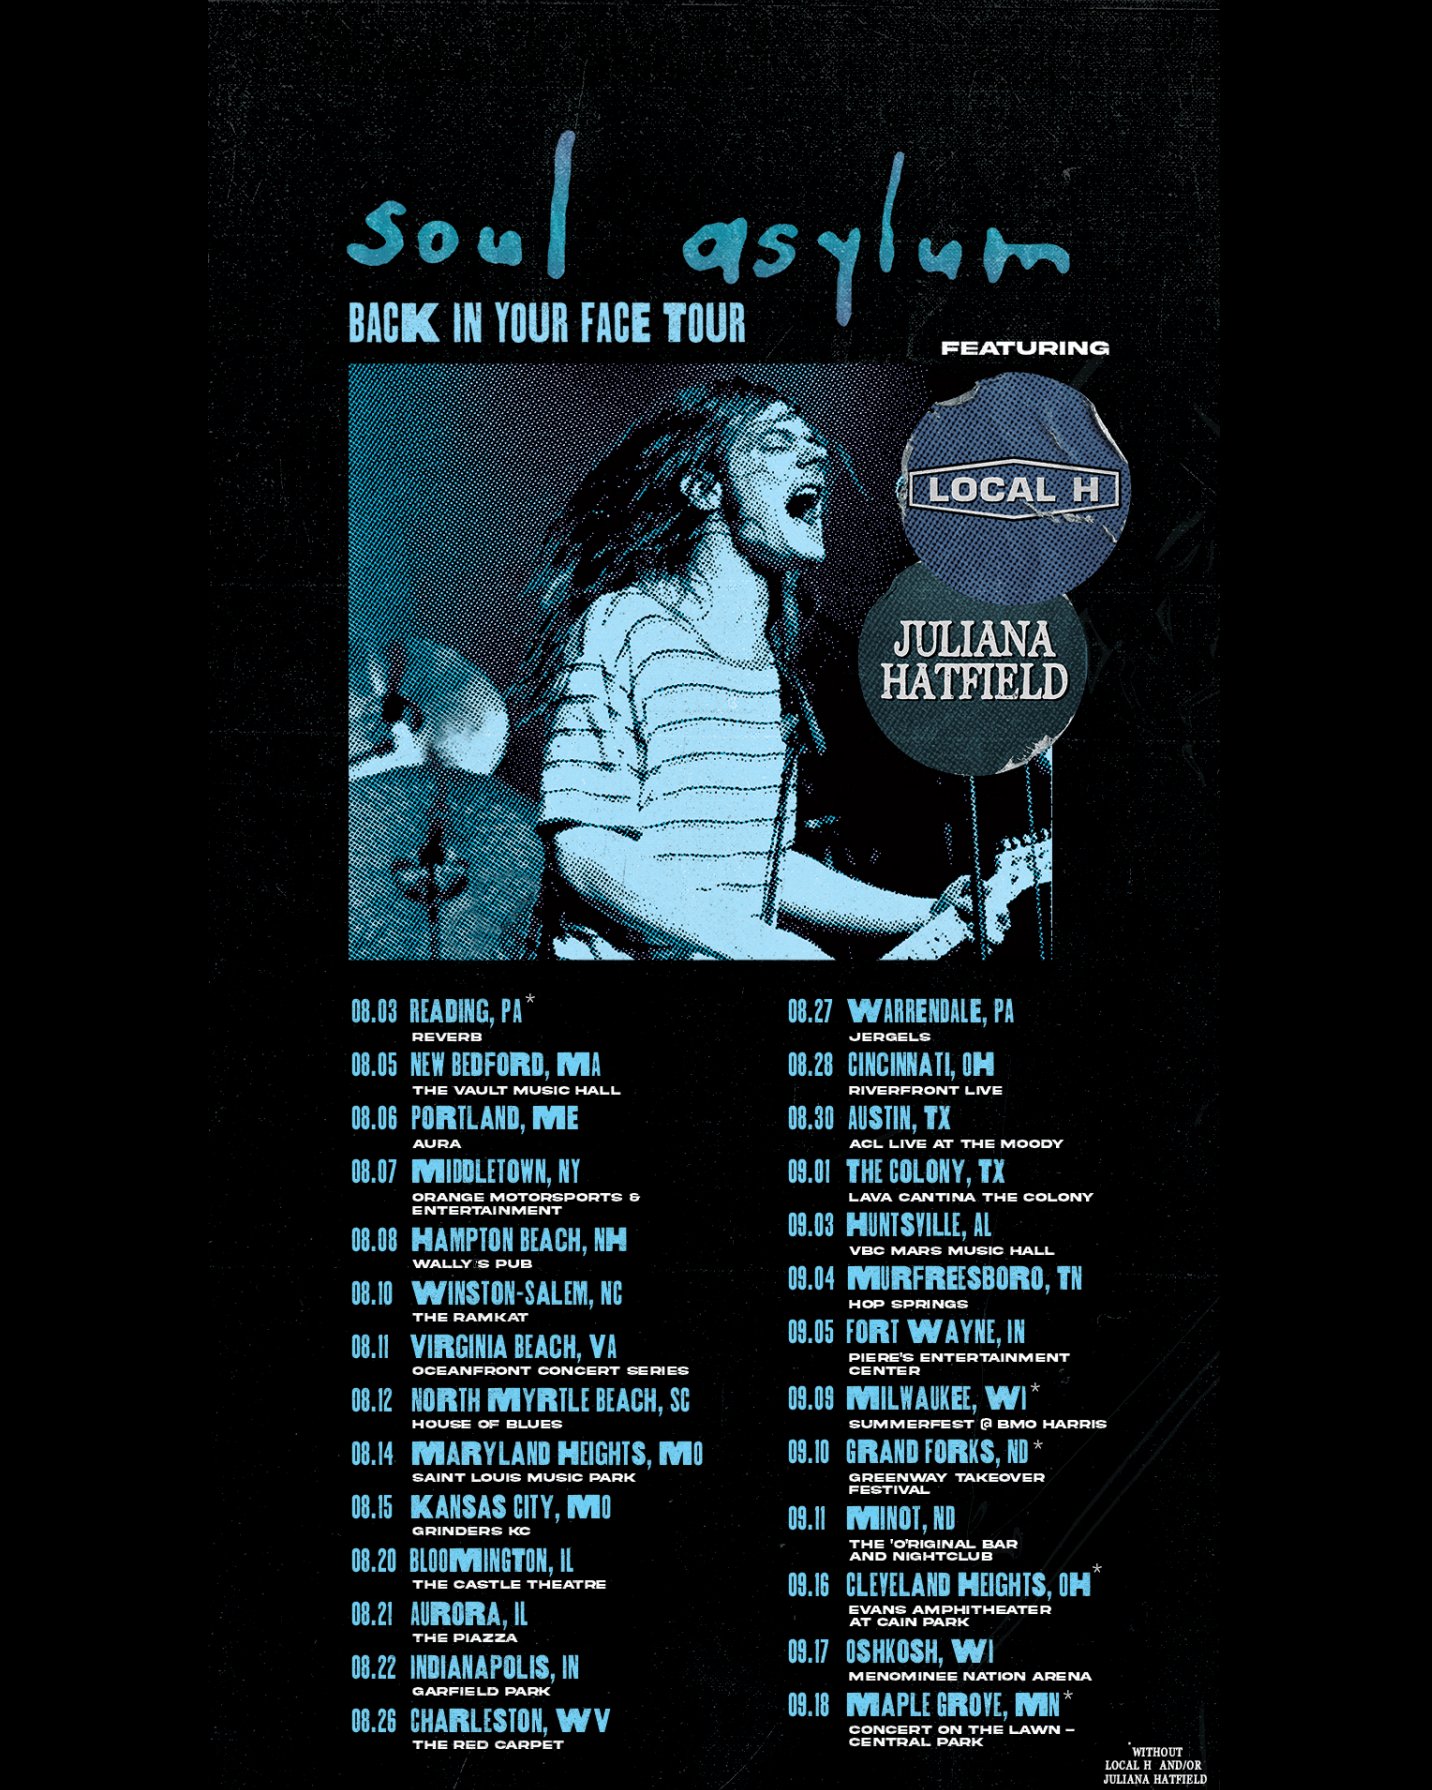 TOUR NEWS Soul Asylum set to head out on the "Back In Your Face" US